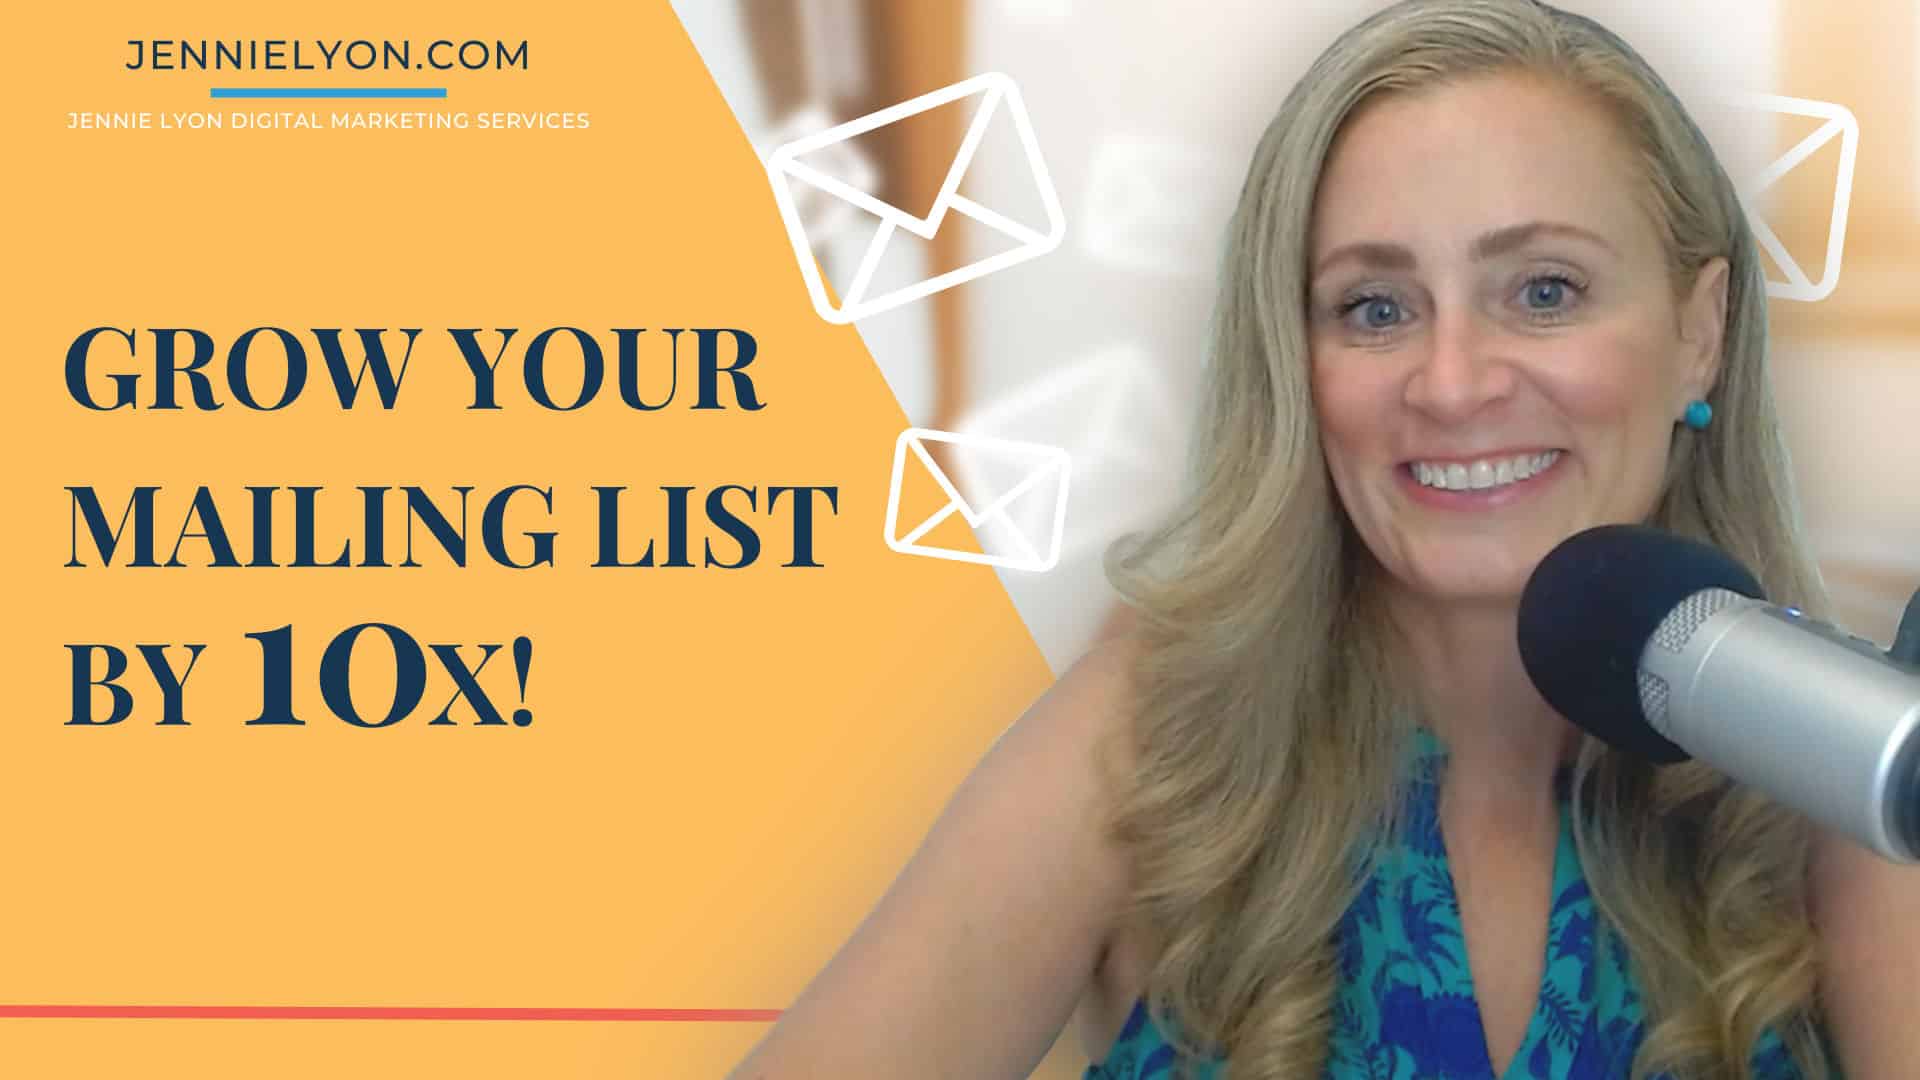 Grow Your Mailing List by 10x!